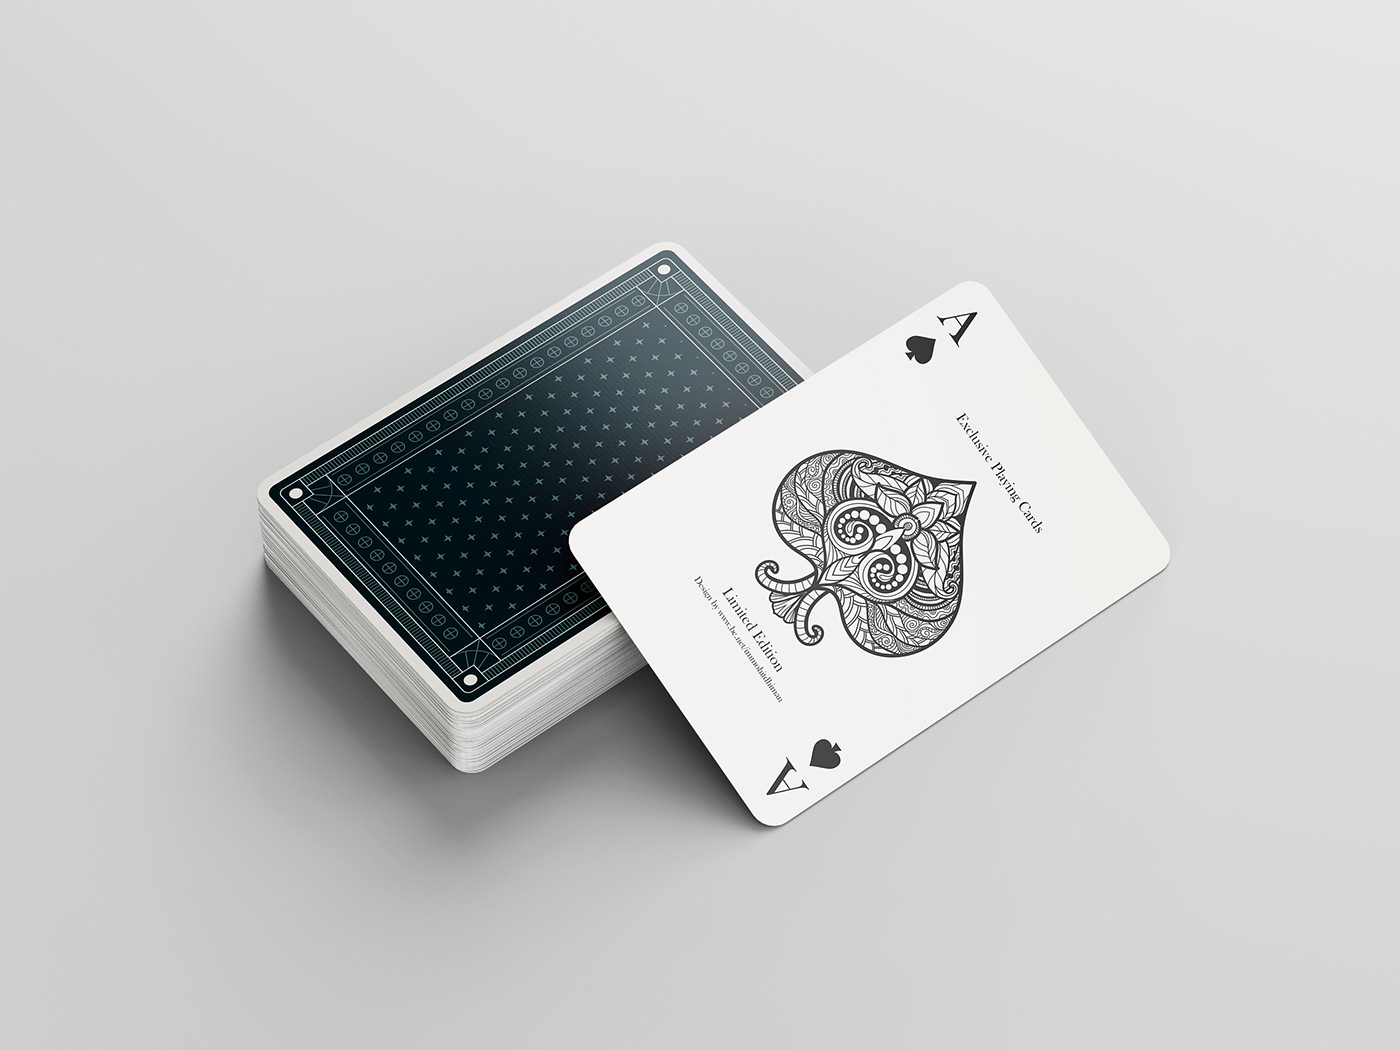 exclusive immohitdhiman packaging design Playing Cards